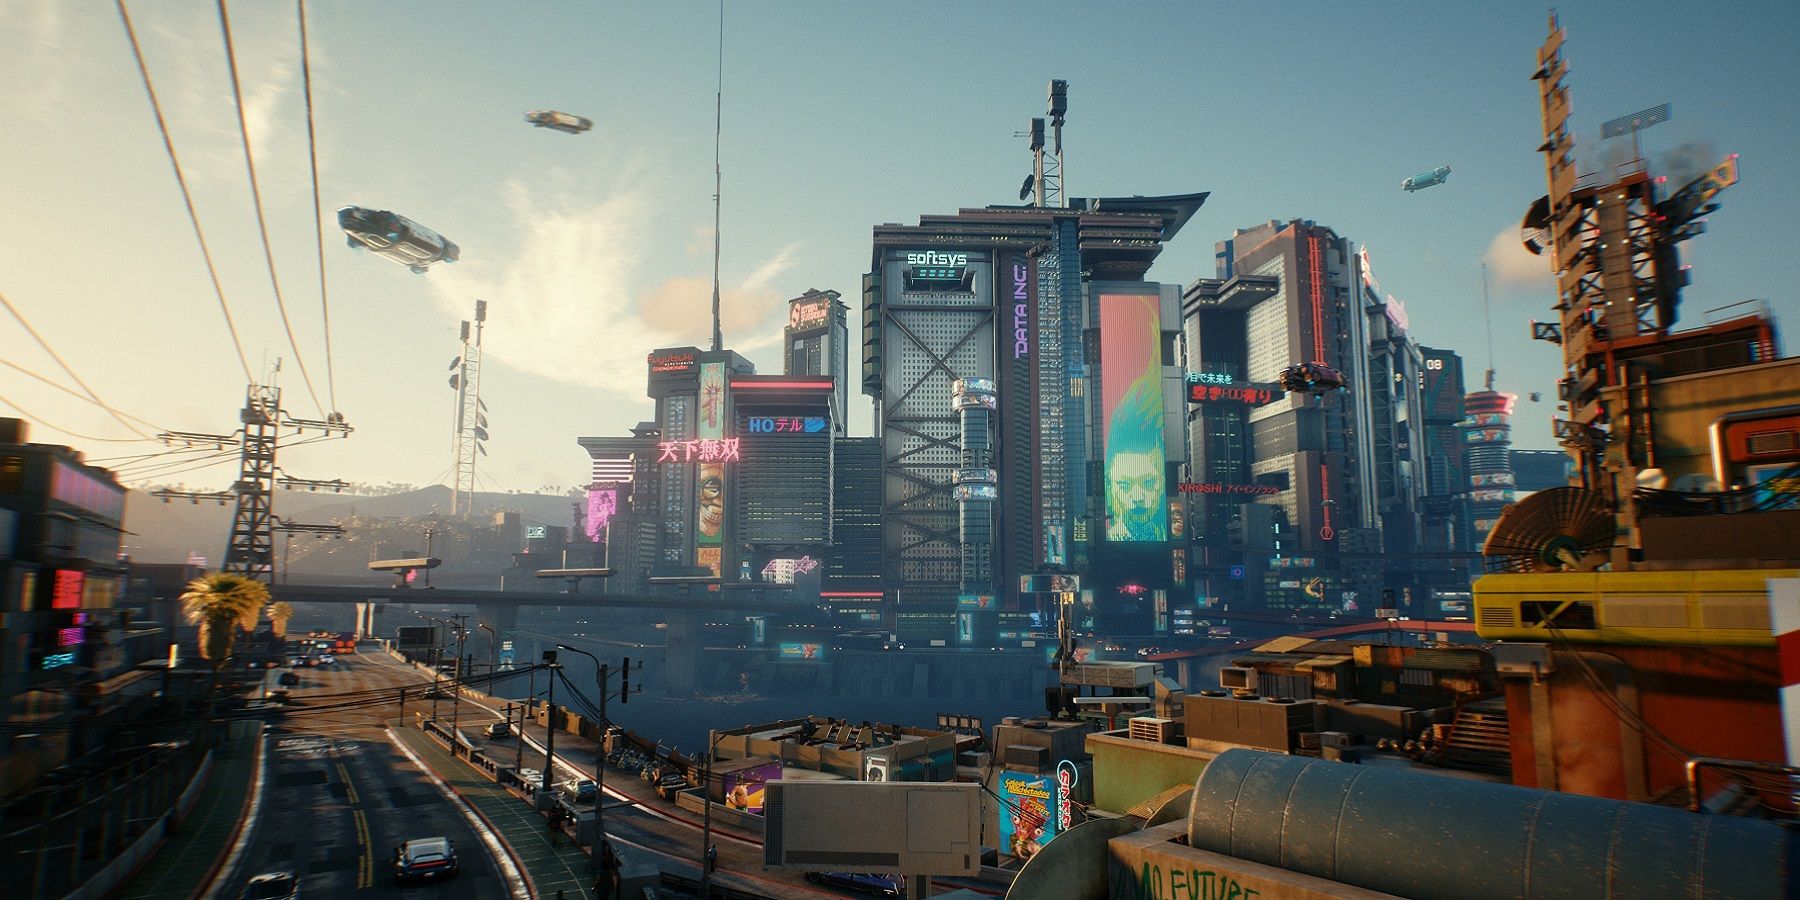 Daytime image from Cyberpunk 2077 showing the more industrial side of Night City.